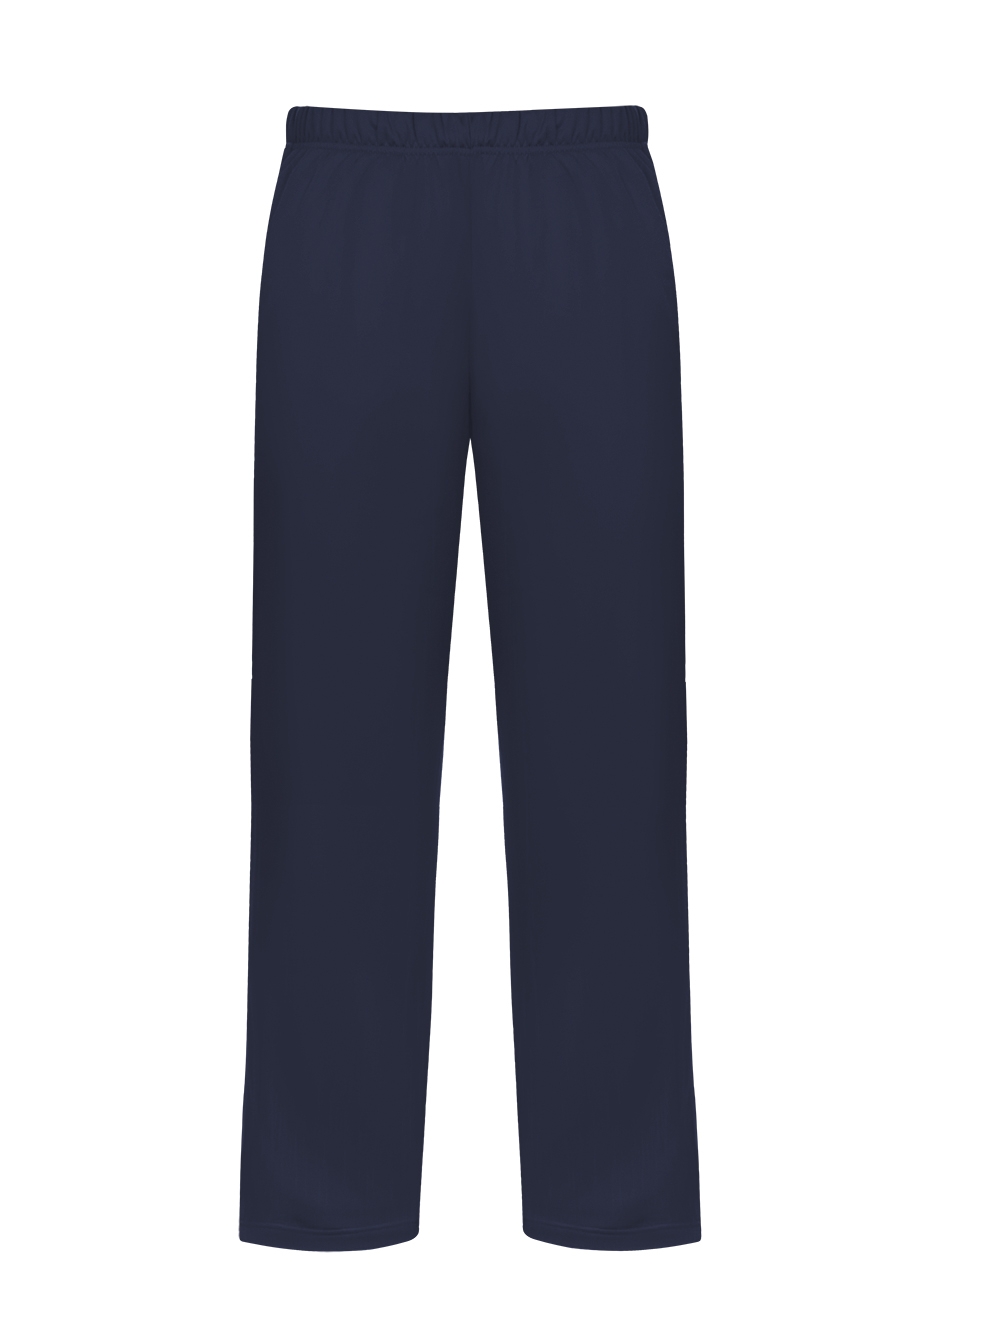 Badger Performance Fleece Pant | Midwest Volleyball Warehouse